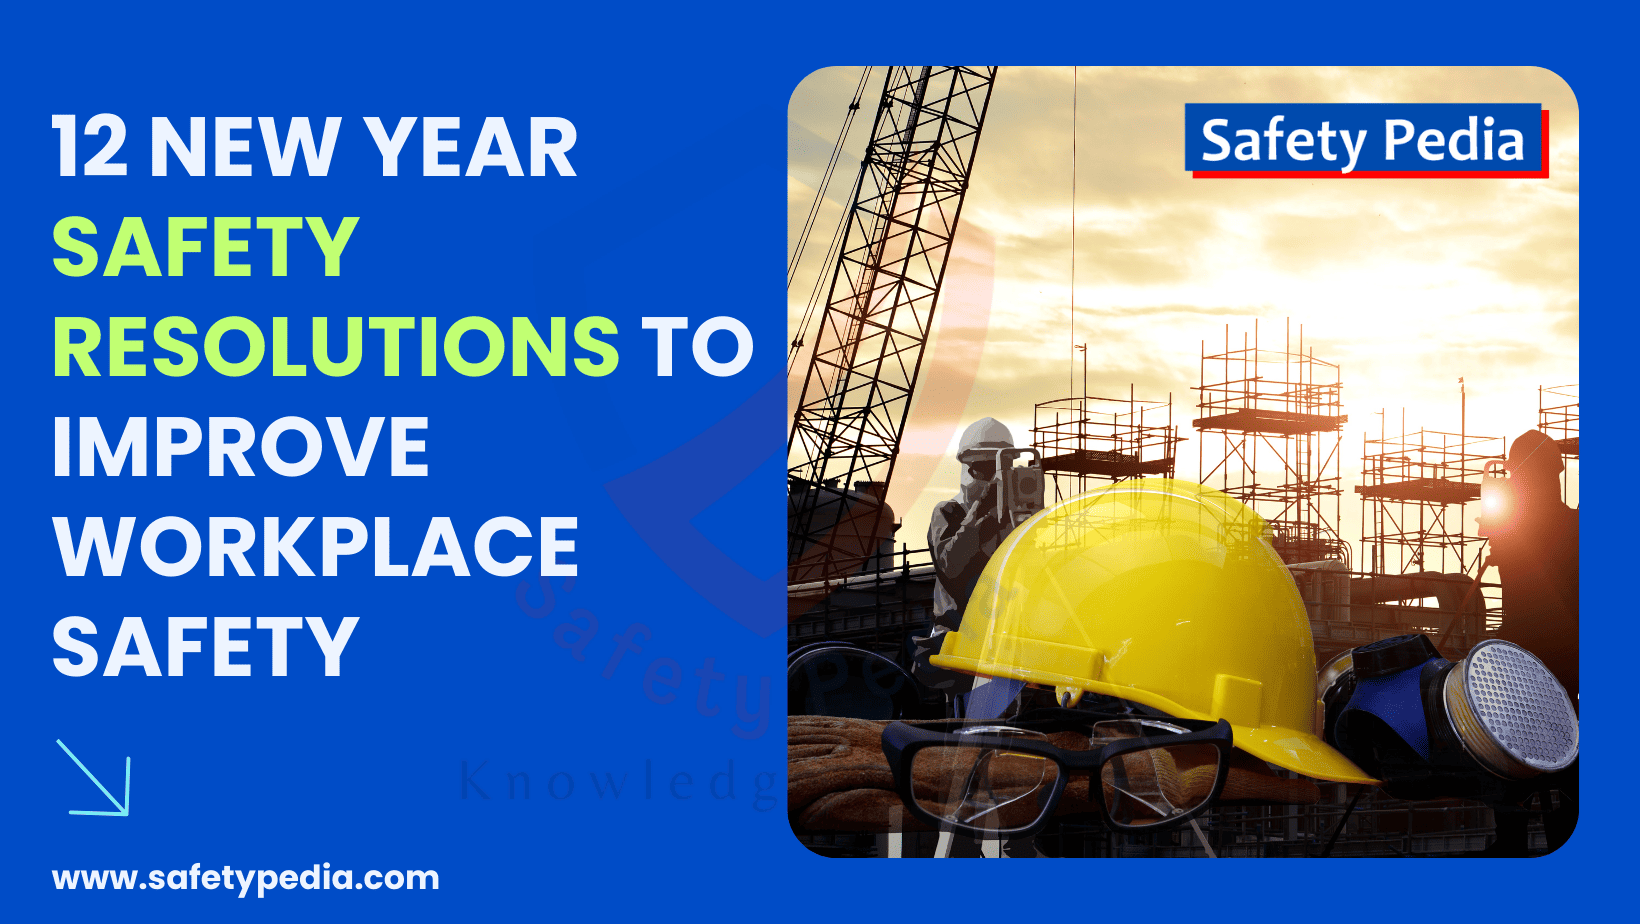 12 New Year Safety Resolutions to Improve Workplace Safety